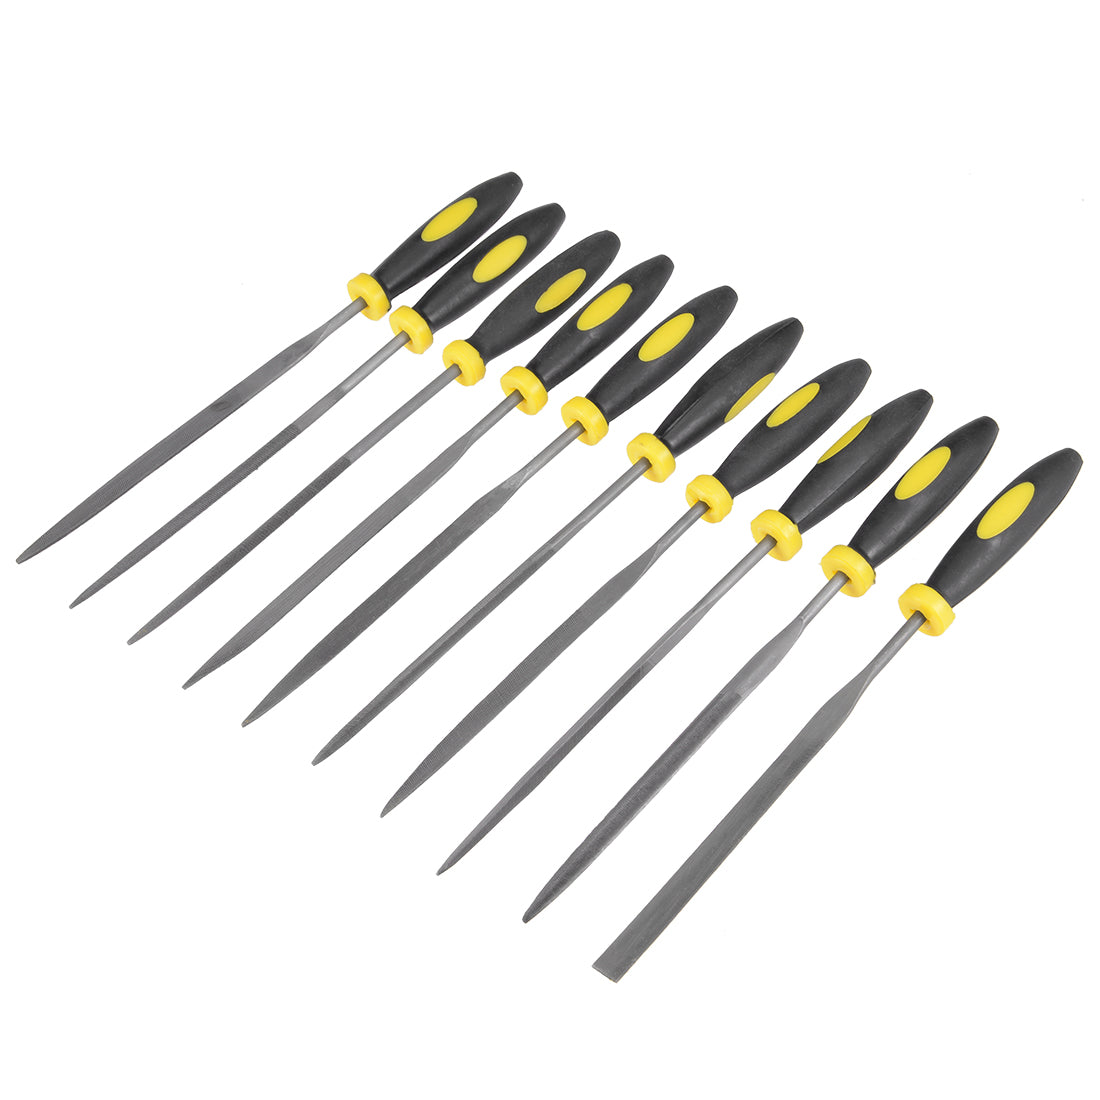 Uxcell Uxcell 10Pcs Smooth Cut Bearing Steel Needle File Set with Rubber Handle, 5mm x 180mm